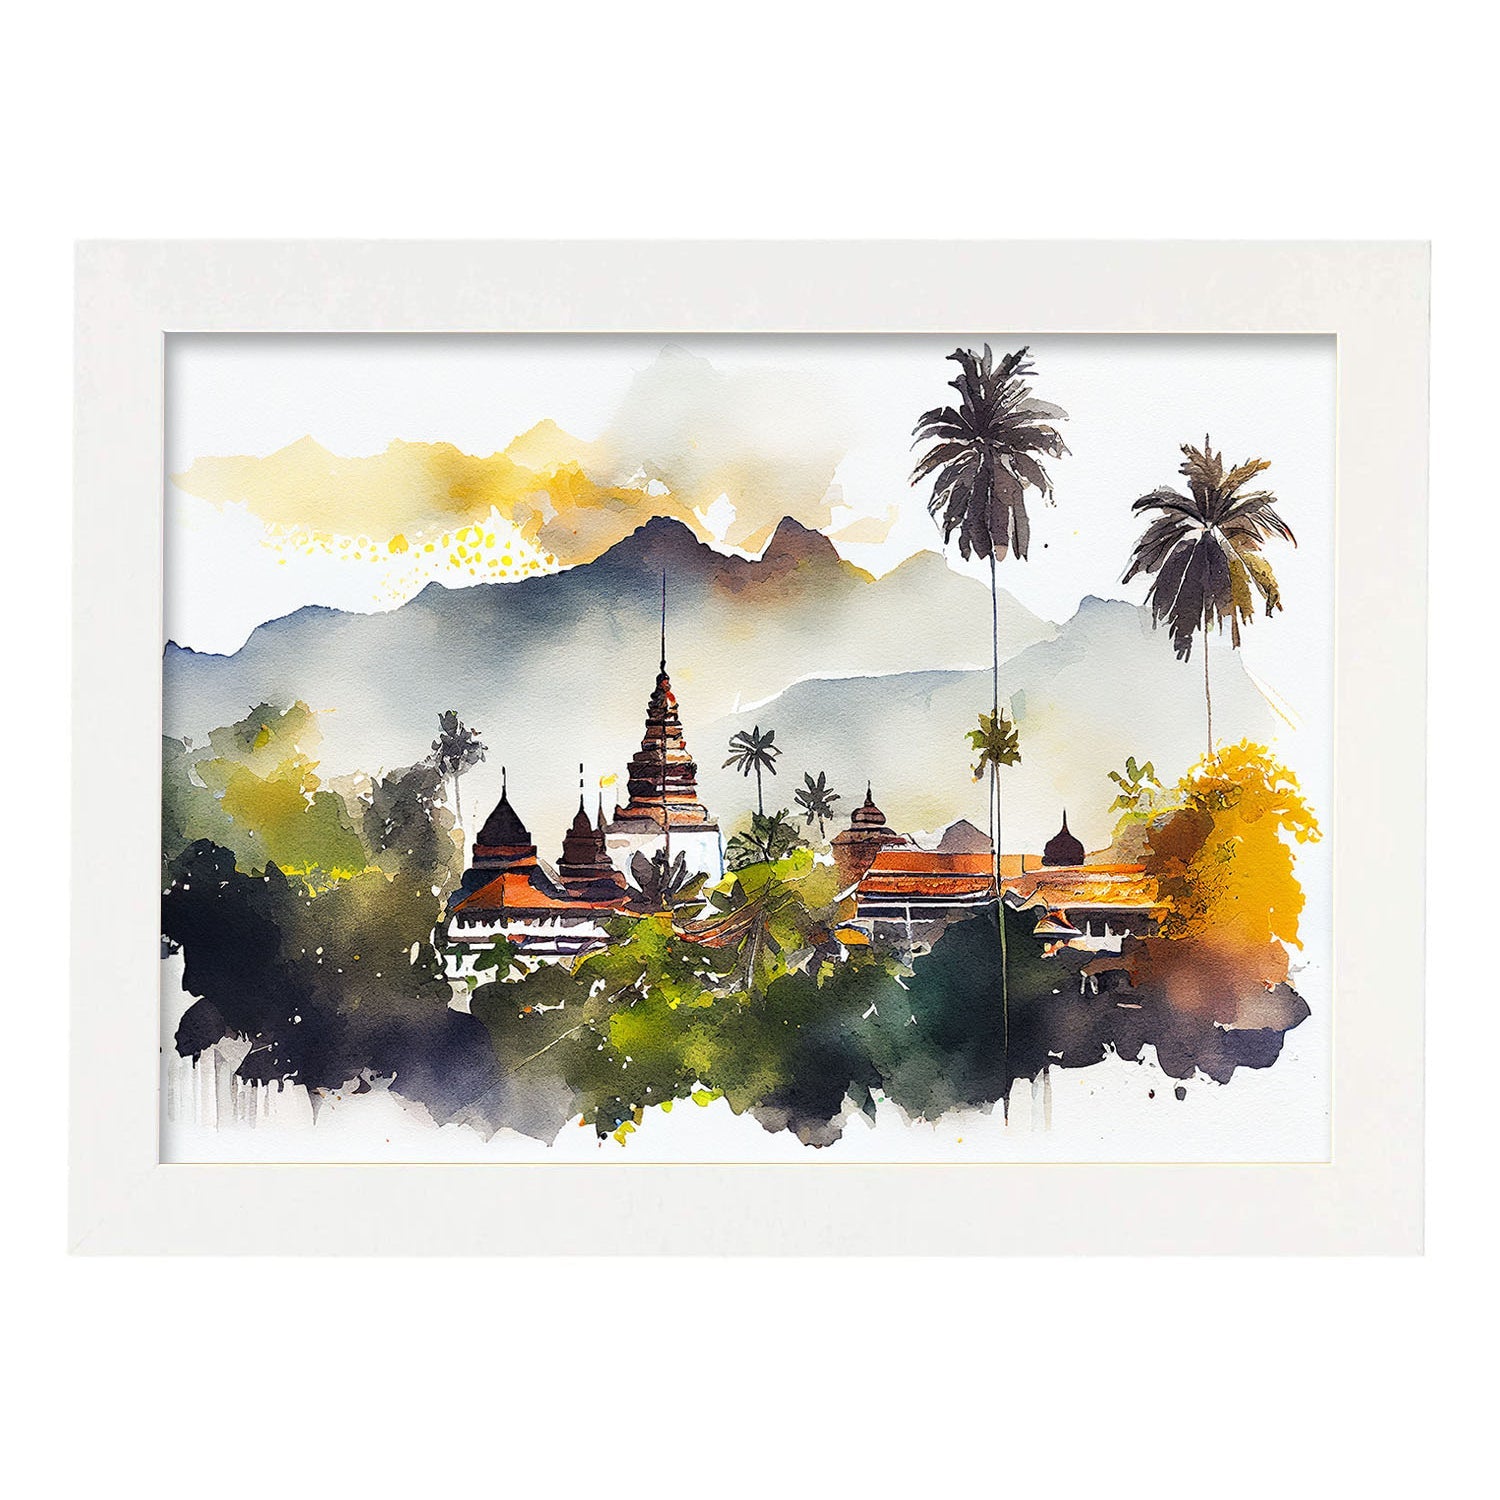 Nacnic watercolor of a skyline of the city of Luang Prabang. Aesthetic Wall Art Prints for Bedroom or Living Room Design.-Artwork-Nacnic-A4-Marco Blanco-Nacnic Estudio SL